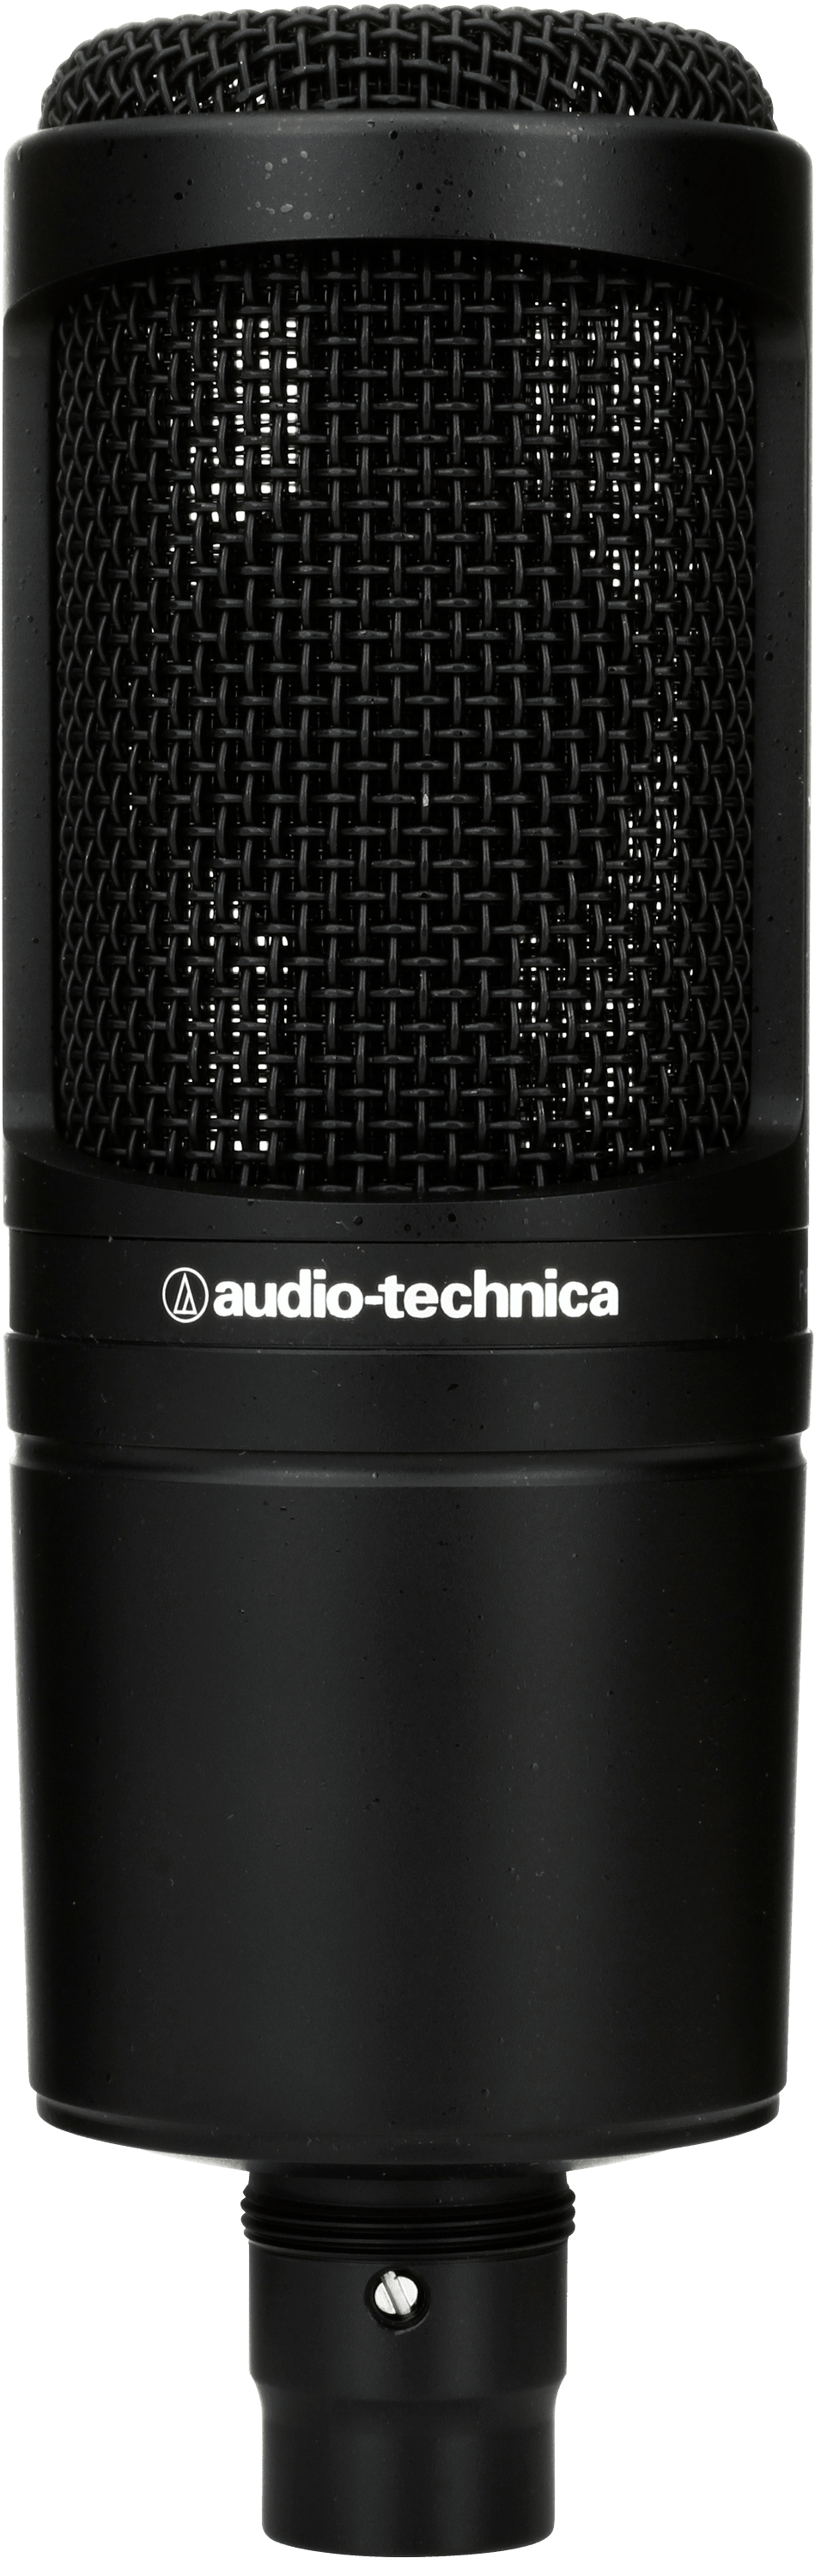 Audio-Technica AT2020 - The Rock Store